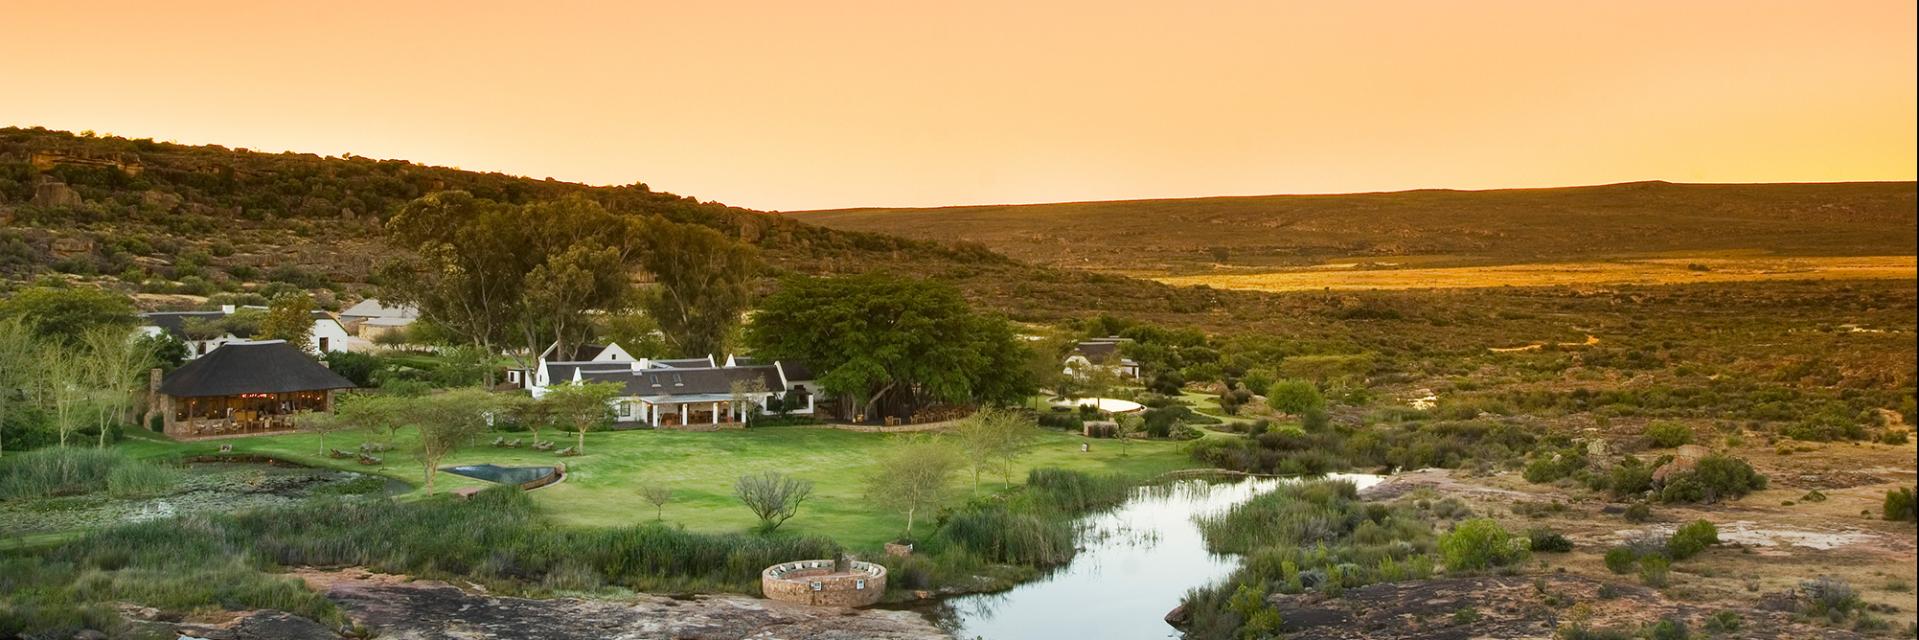 Bushmans Kloof exterior view at sunset.